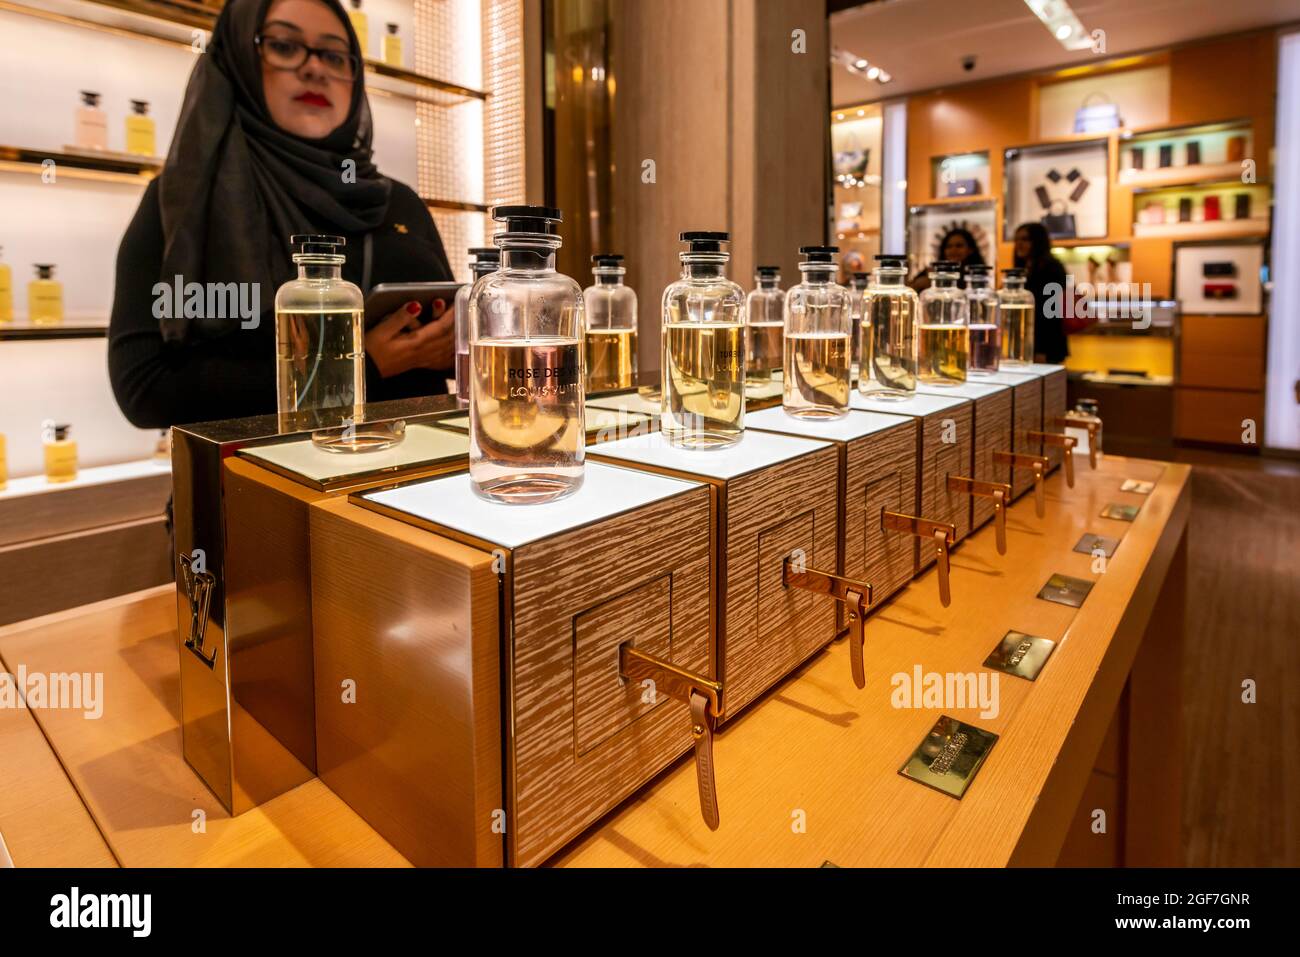 Woman with headscarf looking into lined up perfume bottles, luxury department stores, Harrods, London, England, Great Britain Stock Photo